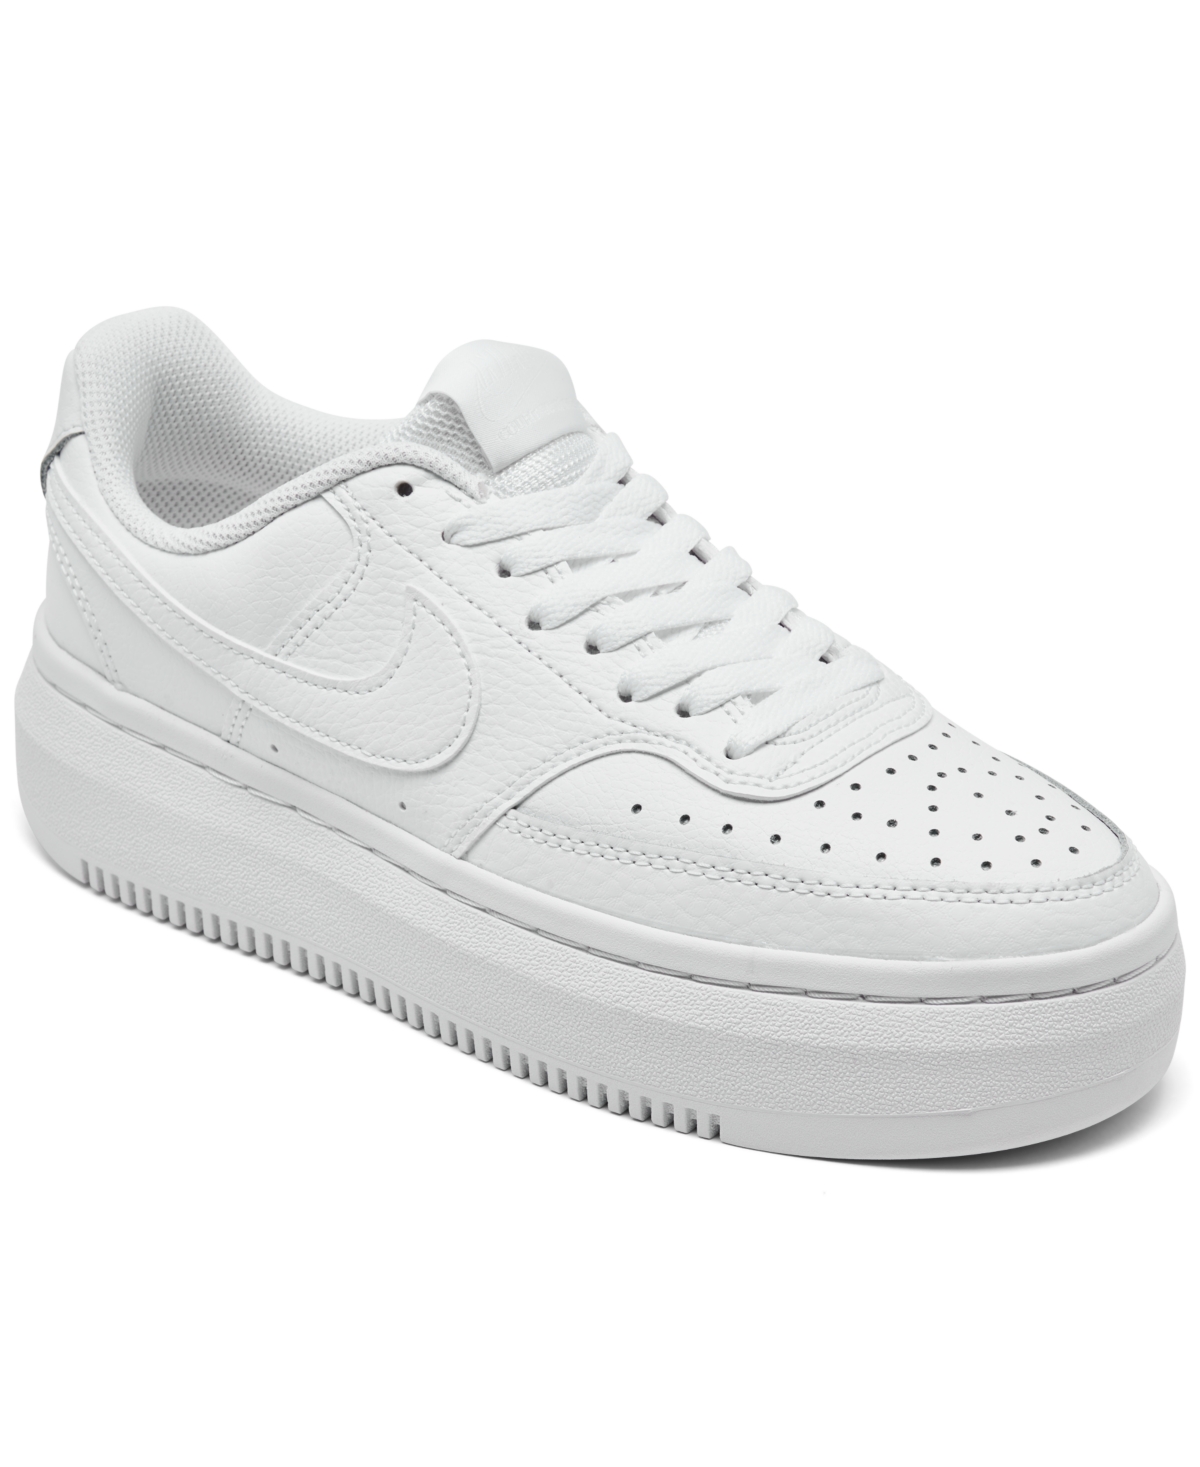 Shop Now For The Nike Women s Court Vision Alta Leather Platform Casual